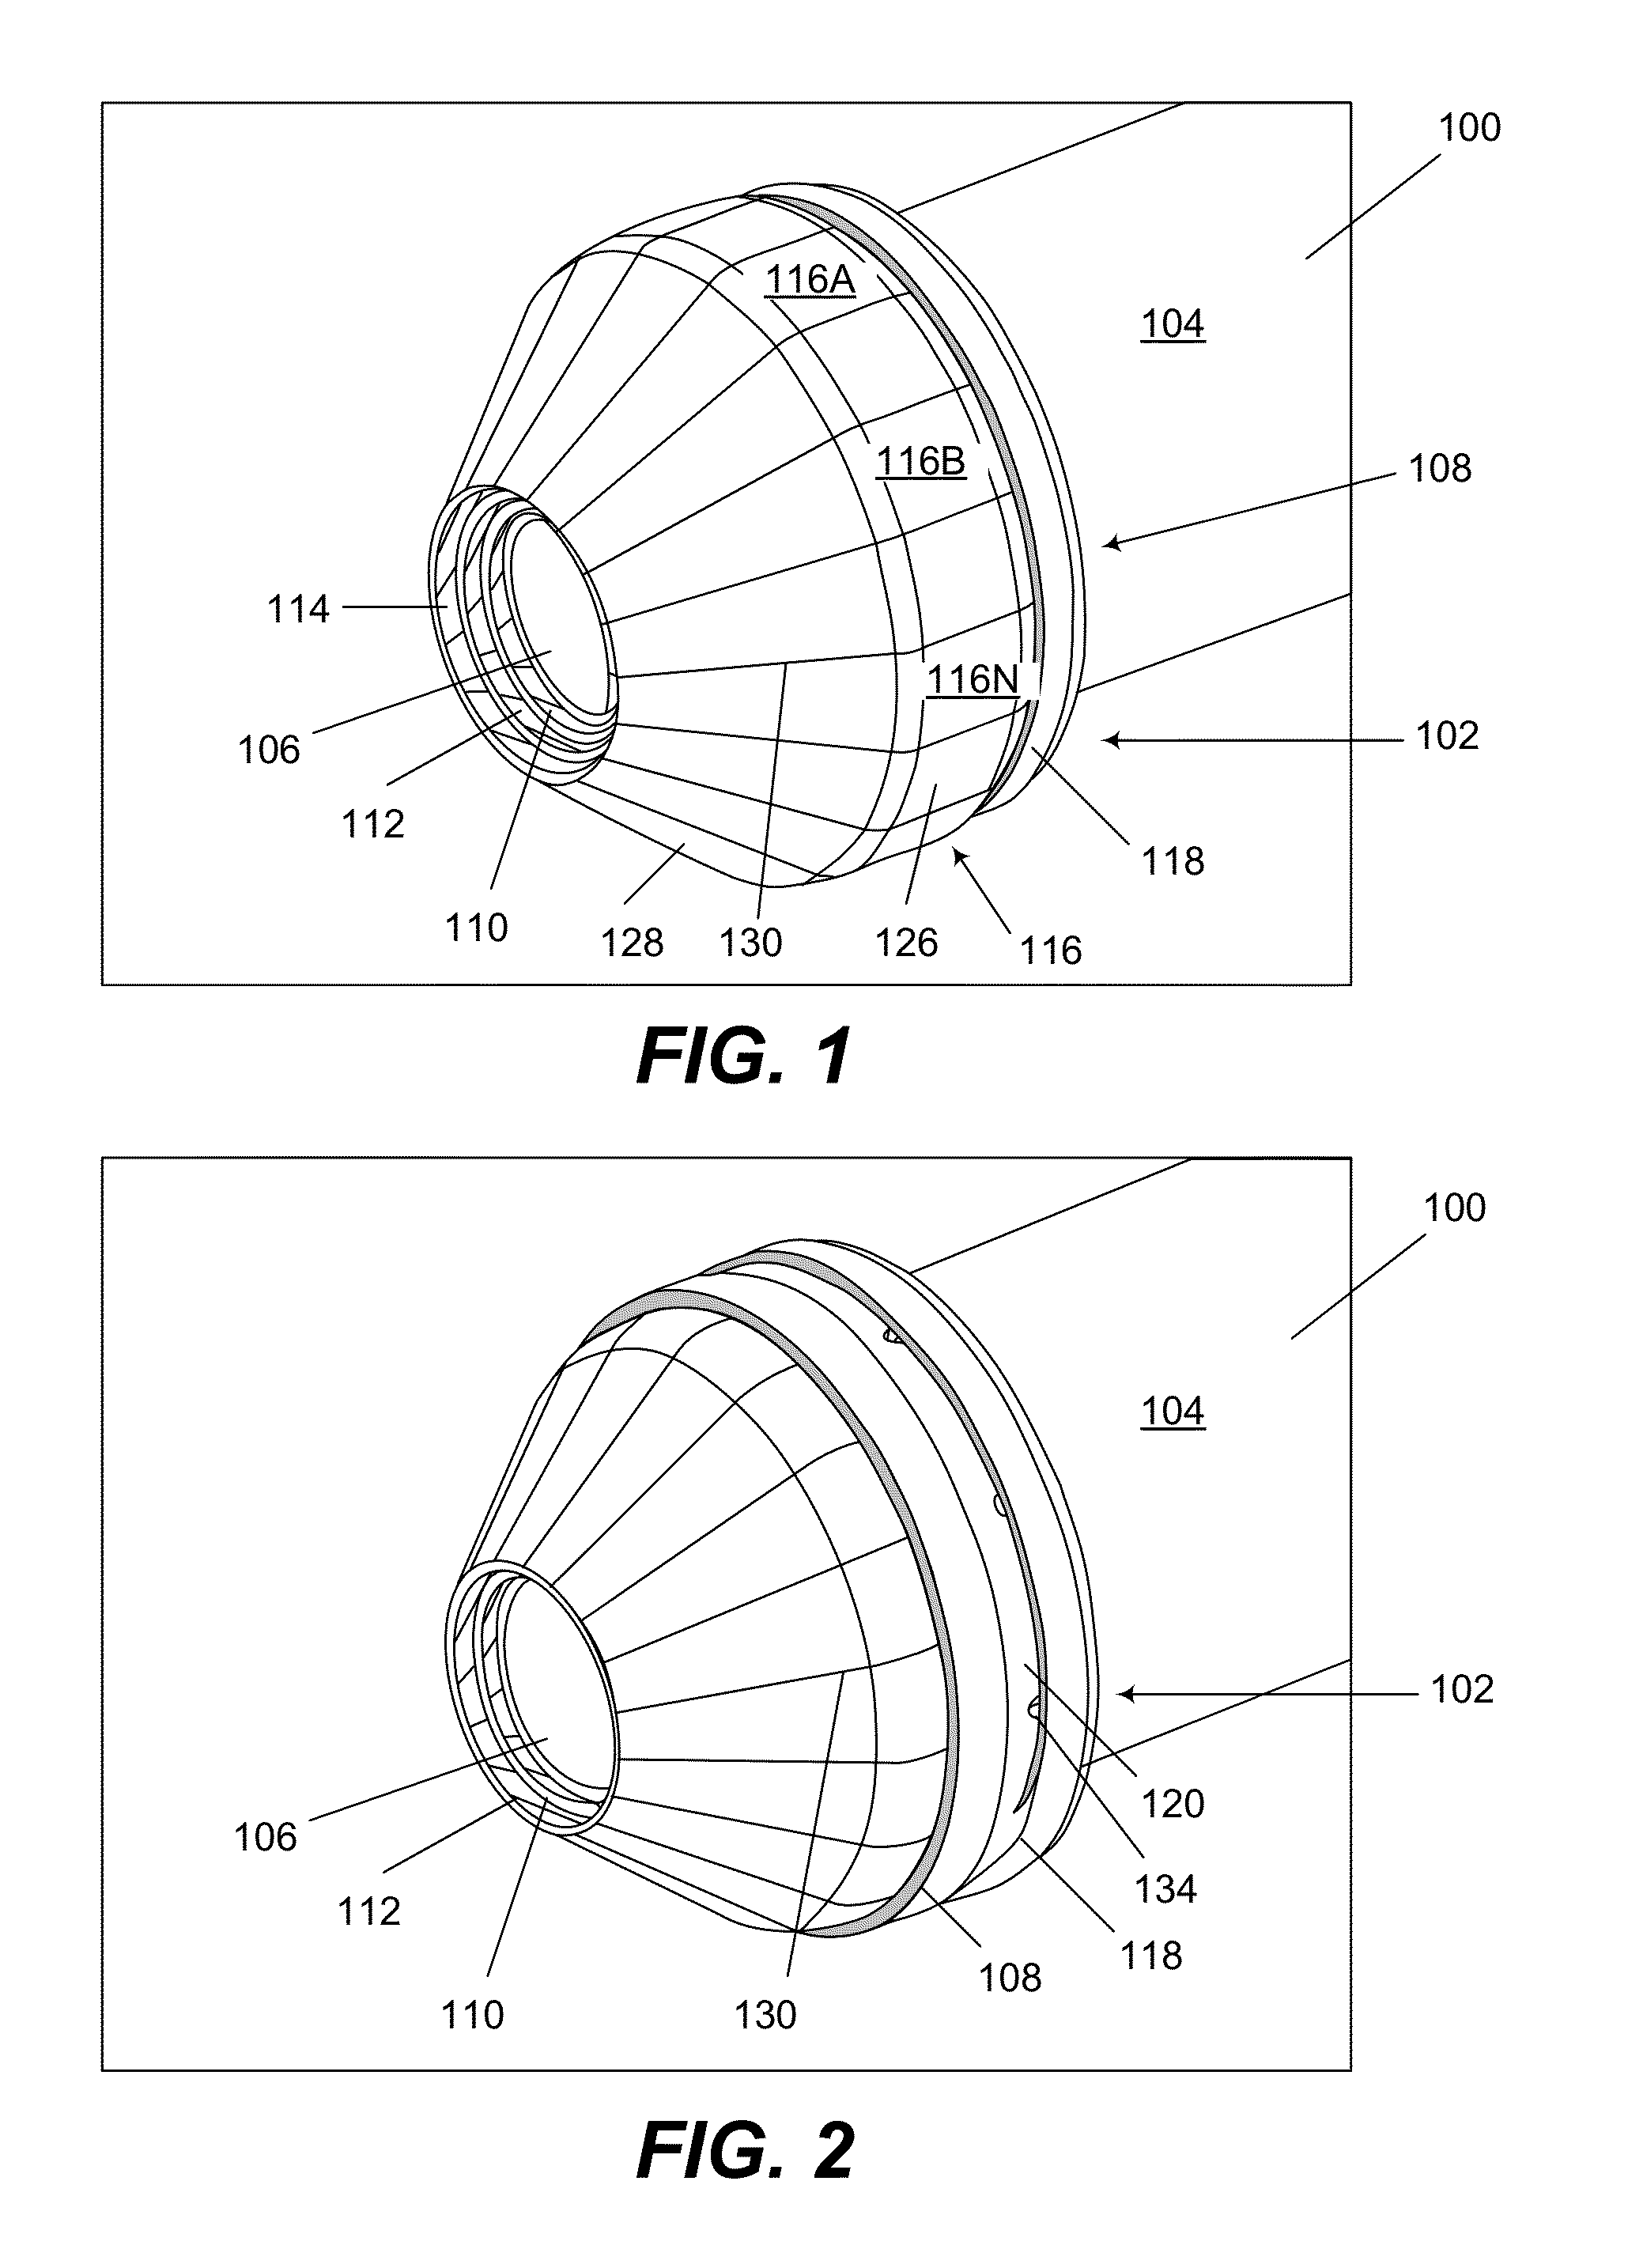 Methods and apparatus for providing a sacrificial shield for a fuel injector